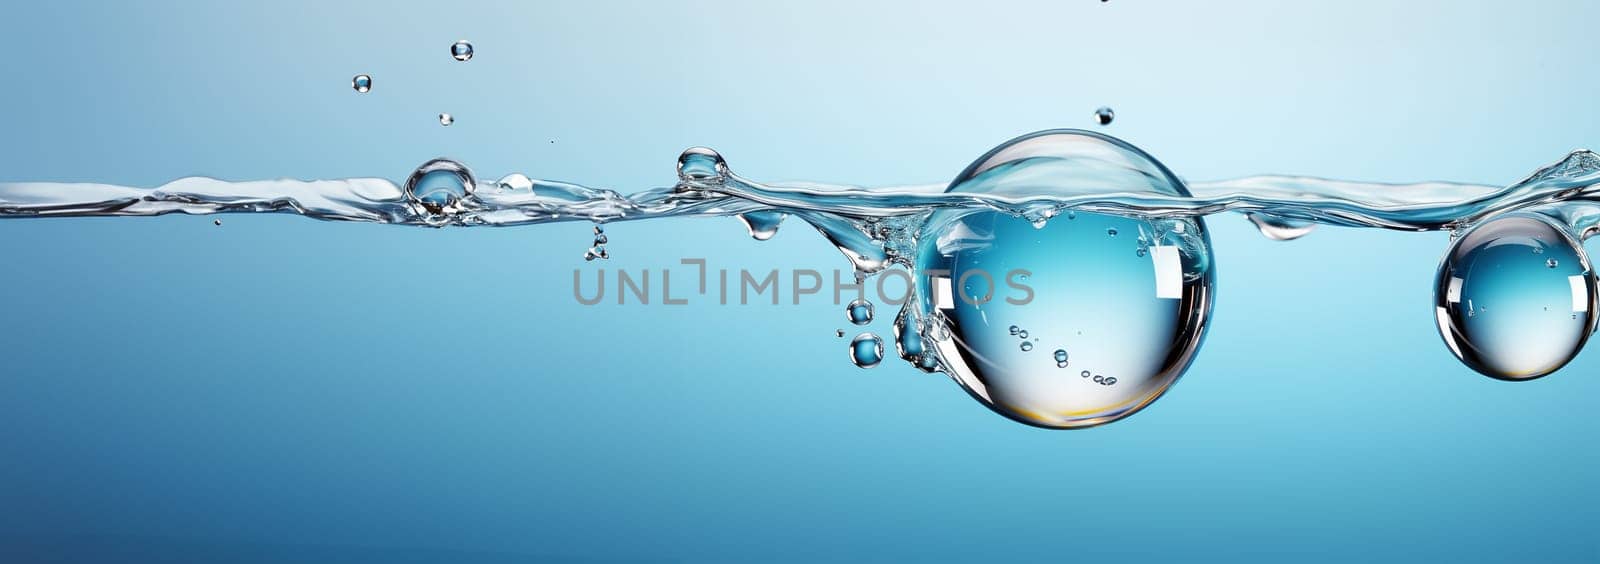 Transparent Realistic water splash with drops clear water background. Macro set splash of water with drops, a splash of falling water, a splash in the form of a crown, a splash in the form of a circle Copy space Blue colored